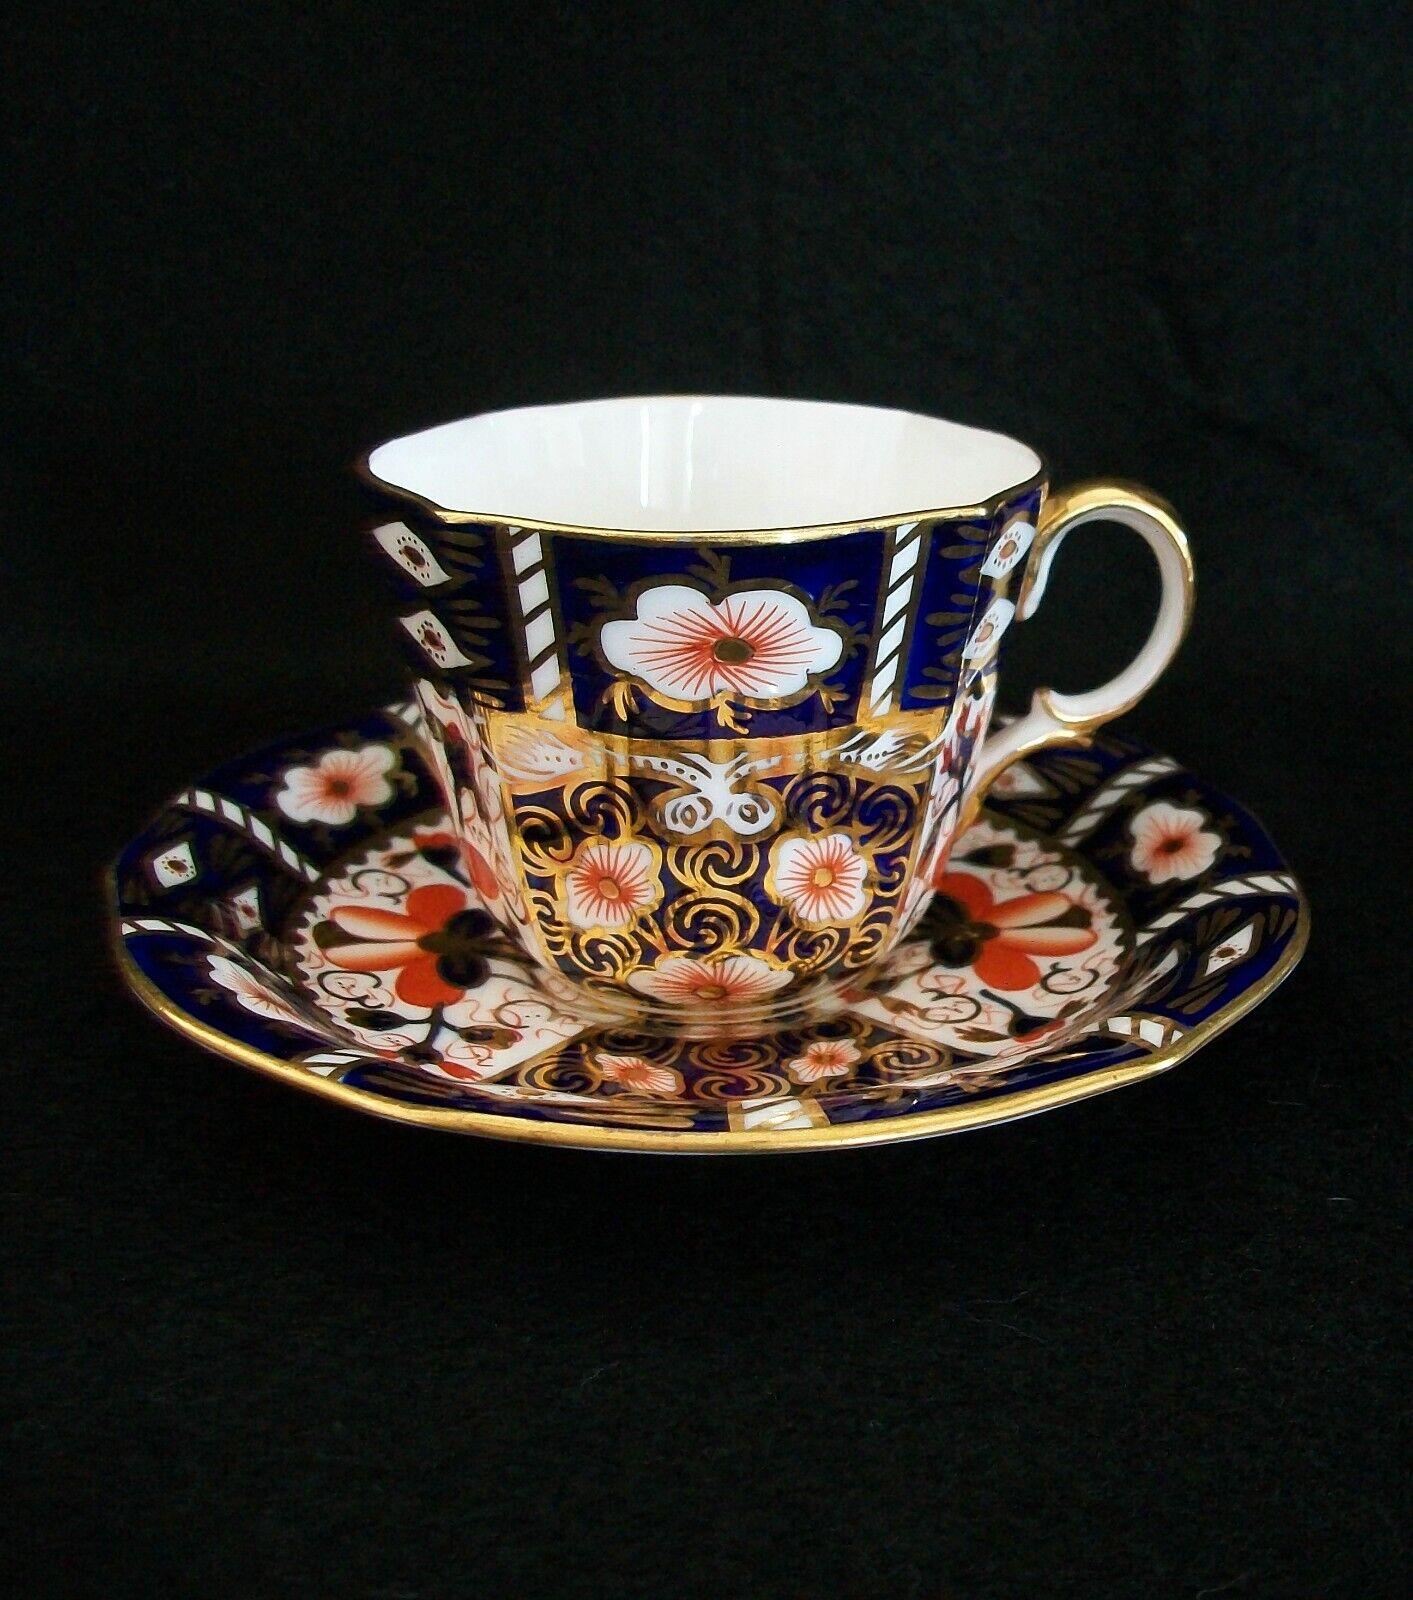 ROYAL CROWN DERBY - Imari Pattern Number 2451 - Vintage bone china tea cup with fluted sides (replacement - circa 1950's) and an antique saucer (circa 1913) - elaborate gilt decoration over blue and orange hand painted oriental pattern - each signed